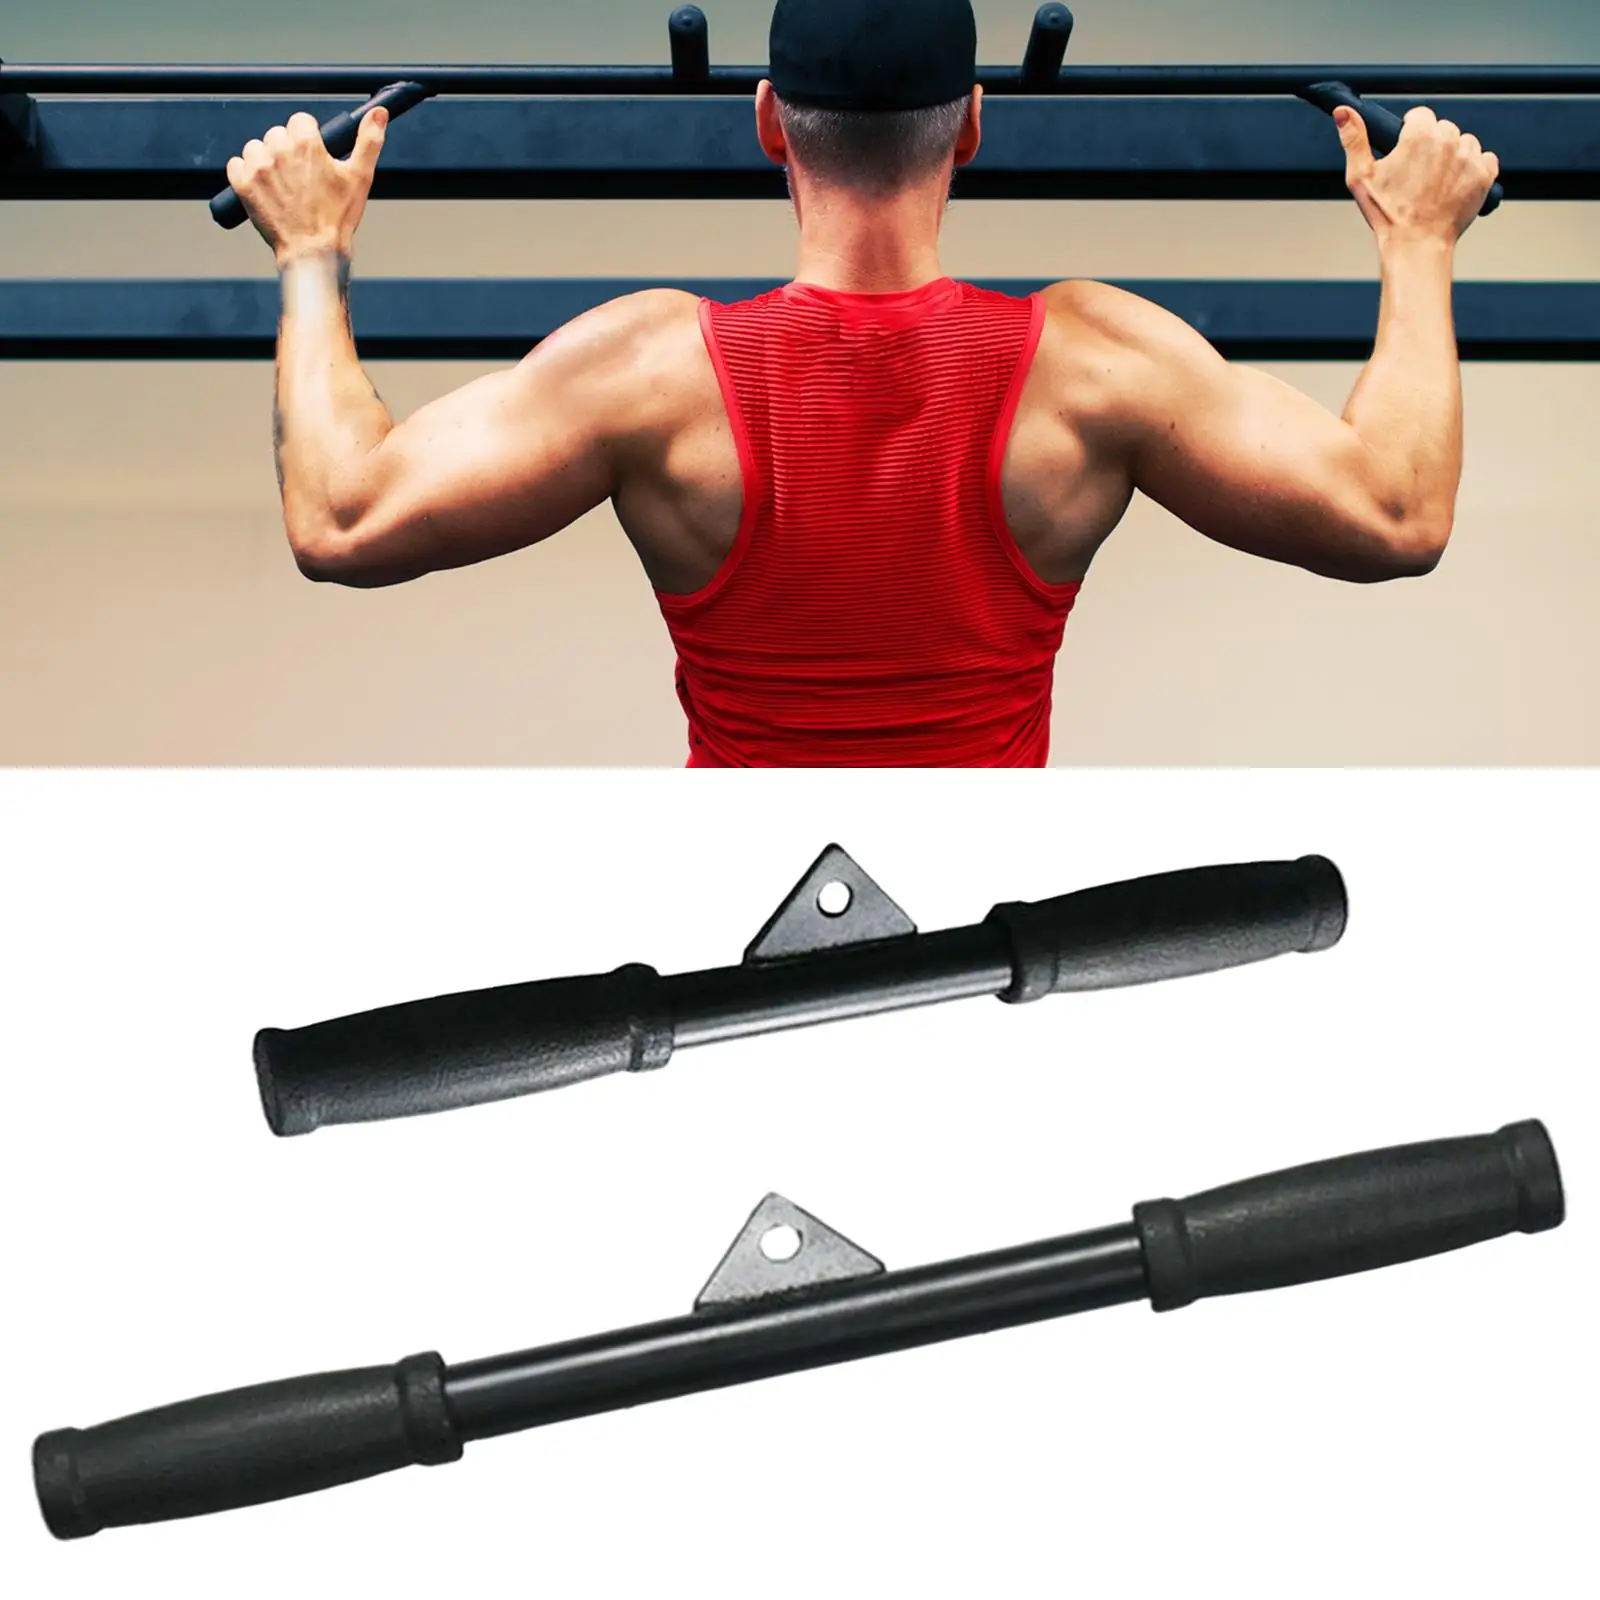 Home Gym Fitness Grips Lat Pull Down Grips Cable Handle T Bar Rowing Biceps Tricep Training Accessories